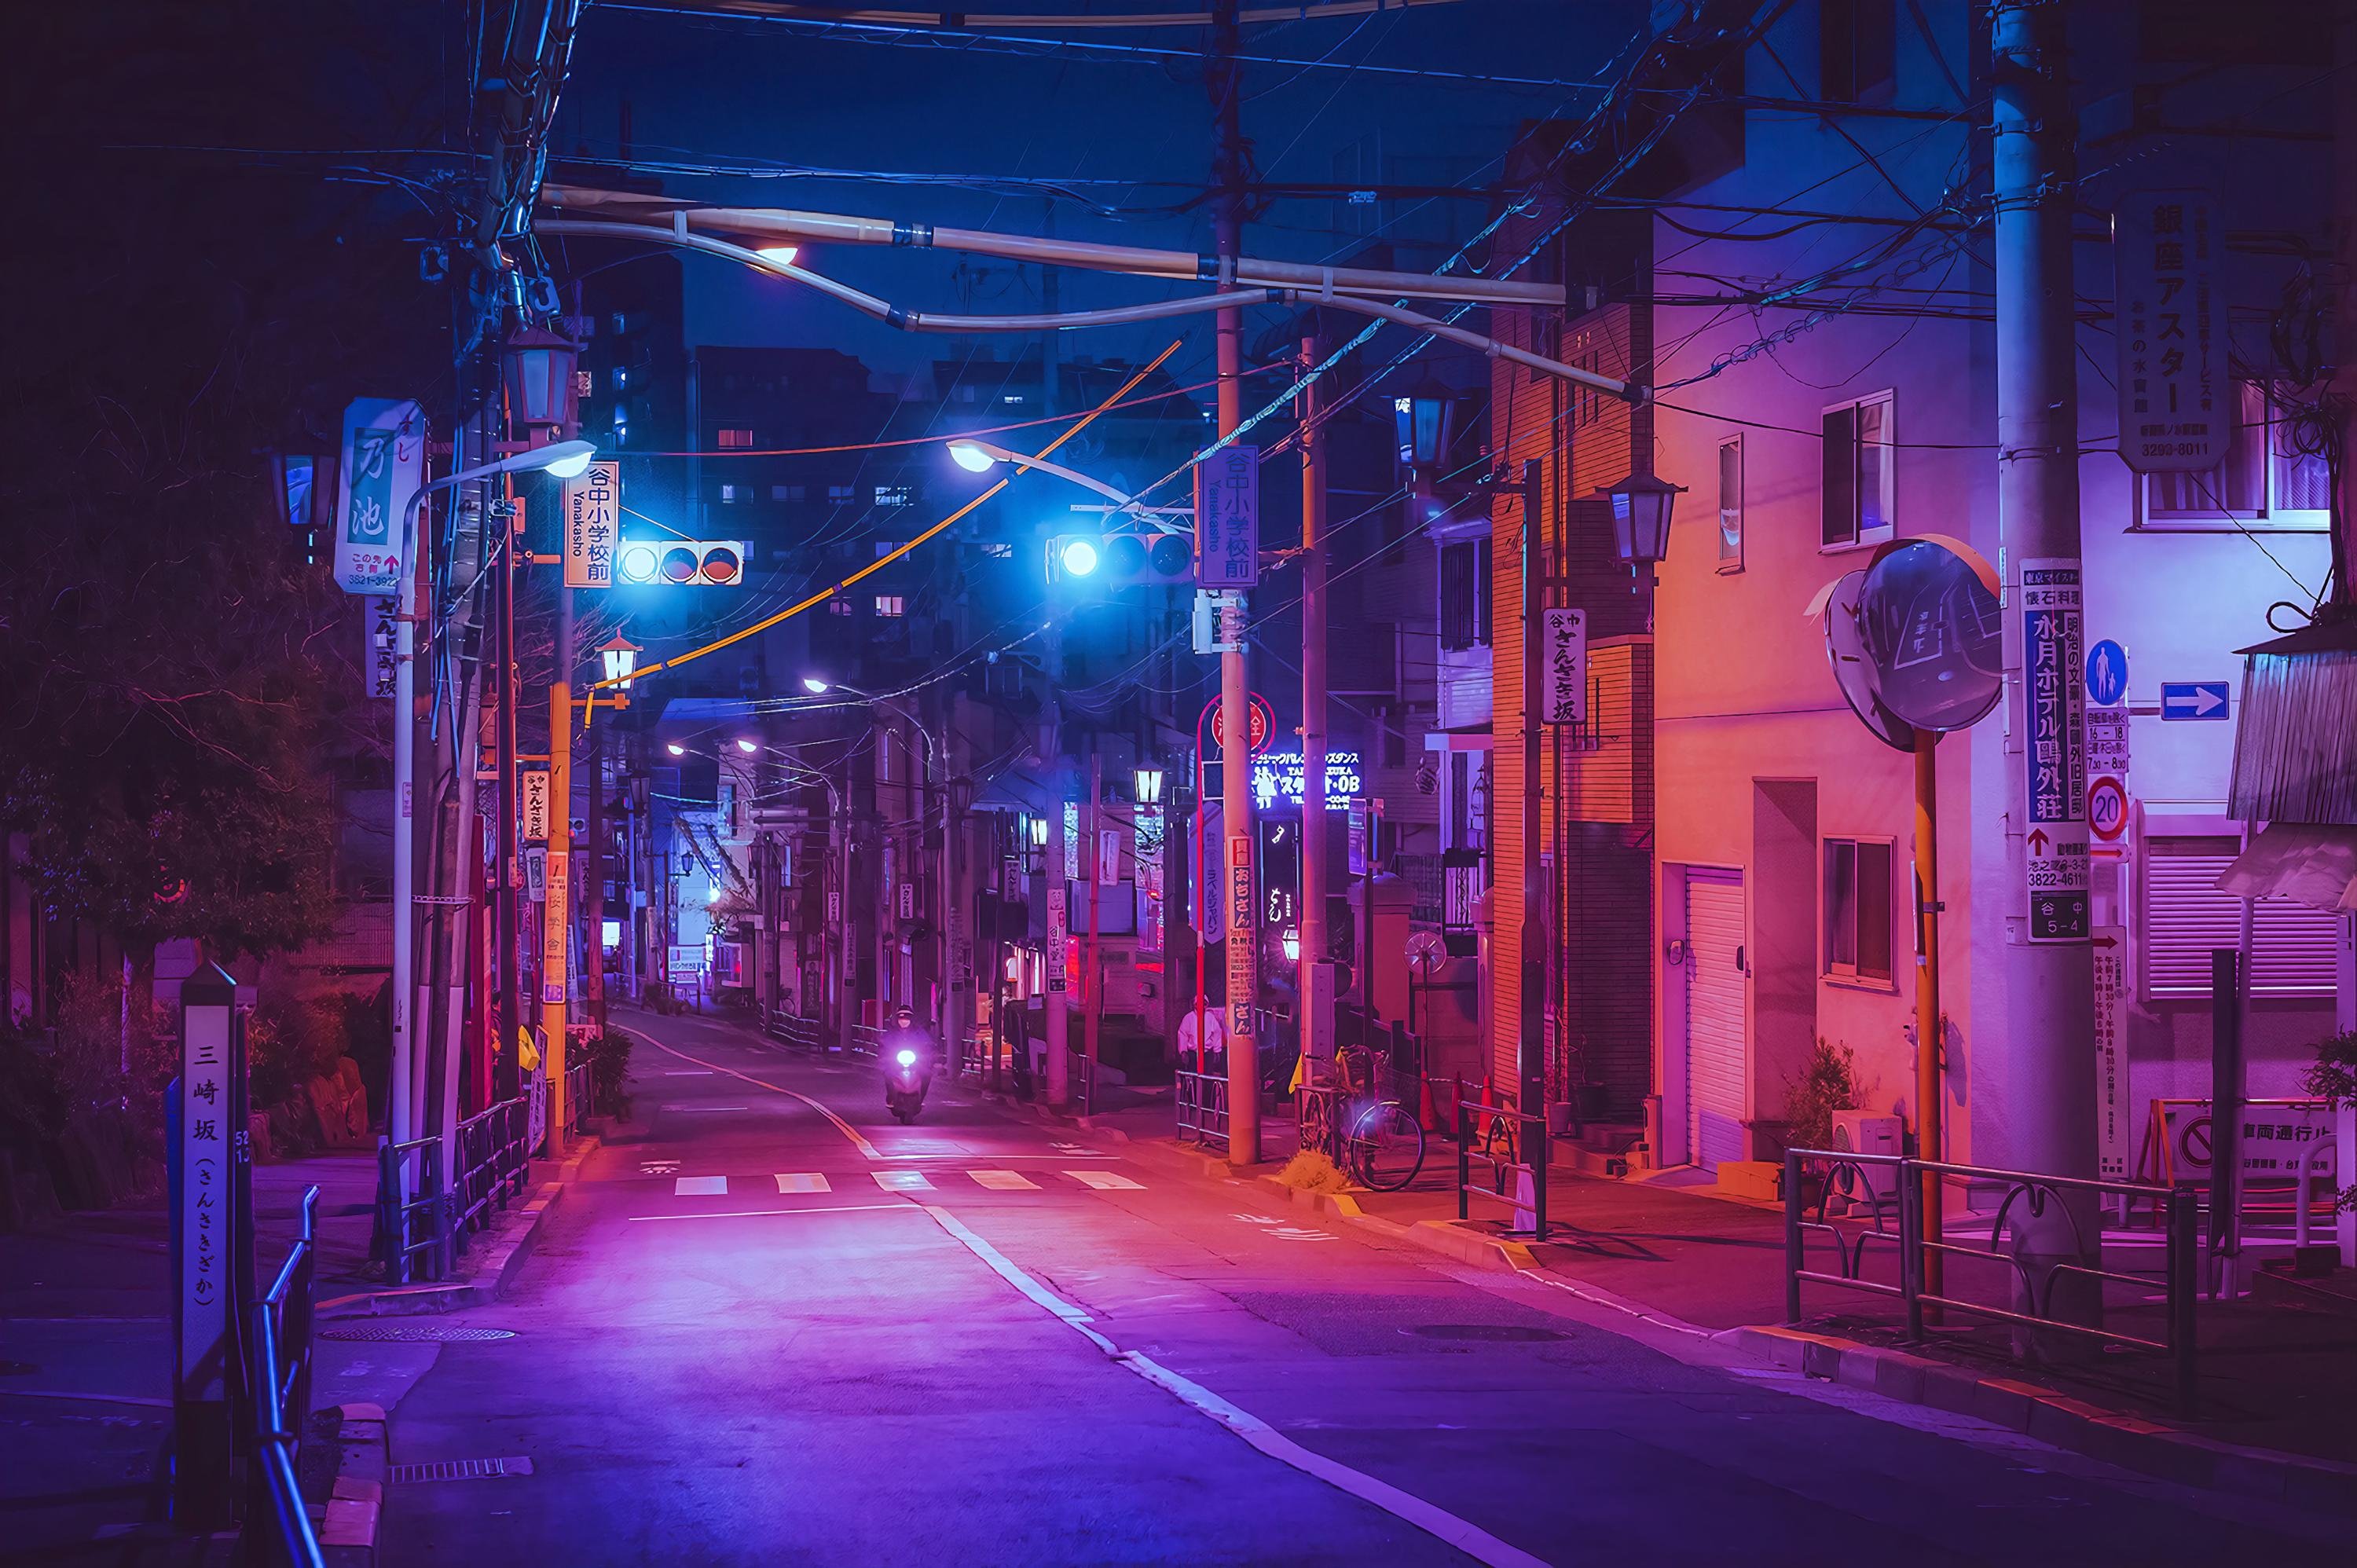 Street 4K Wallpapers For Your Desktop Or Mobile Screen Free And Easy To